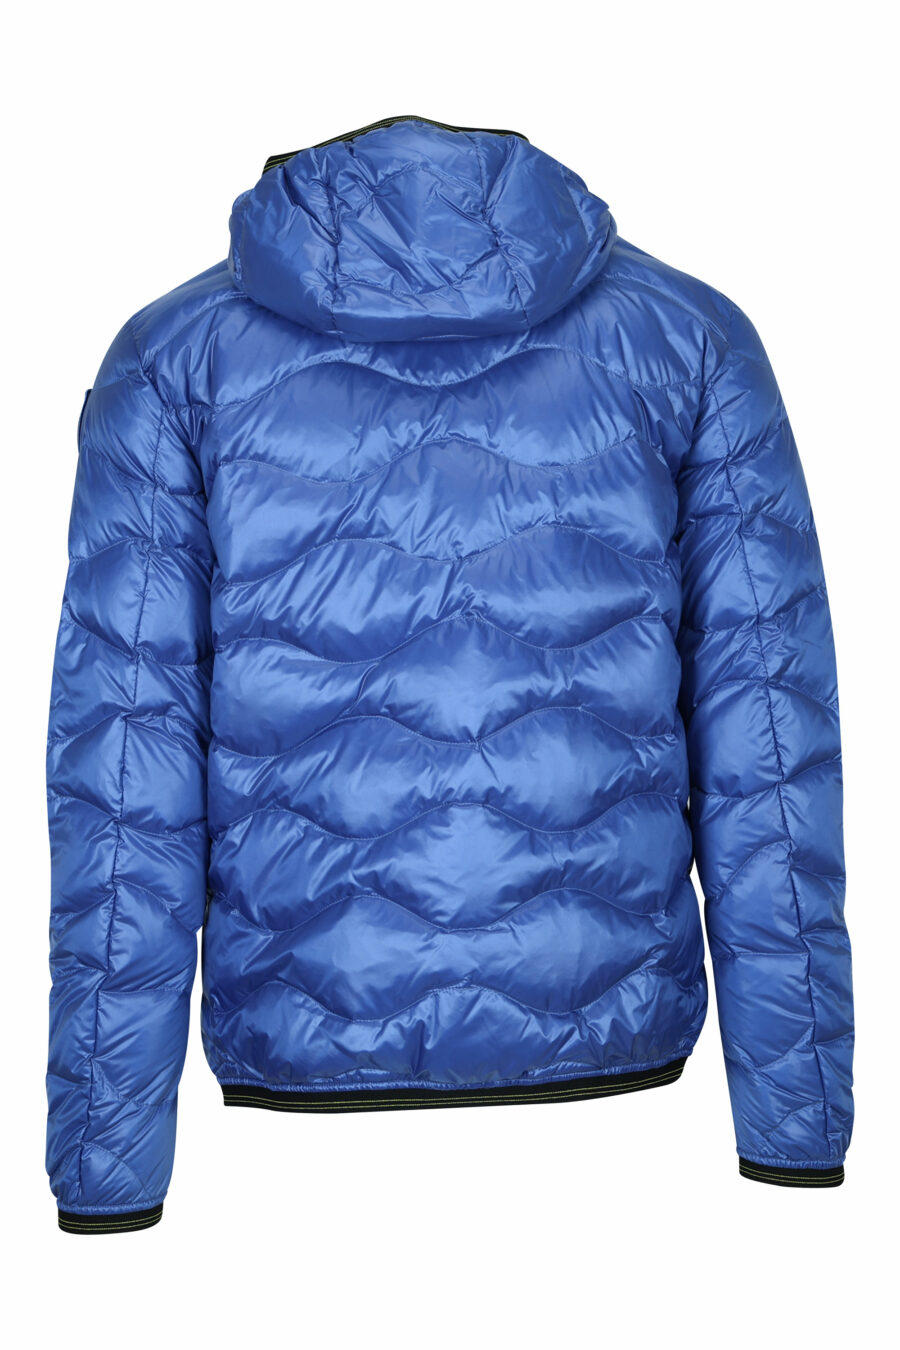 Blue jacket with diagonal lines and hood - 8058610797508 1